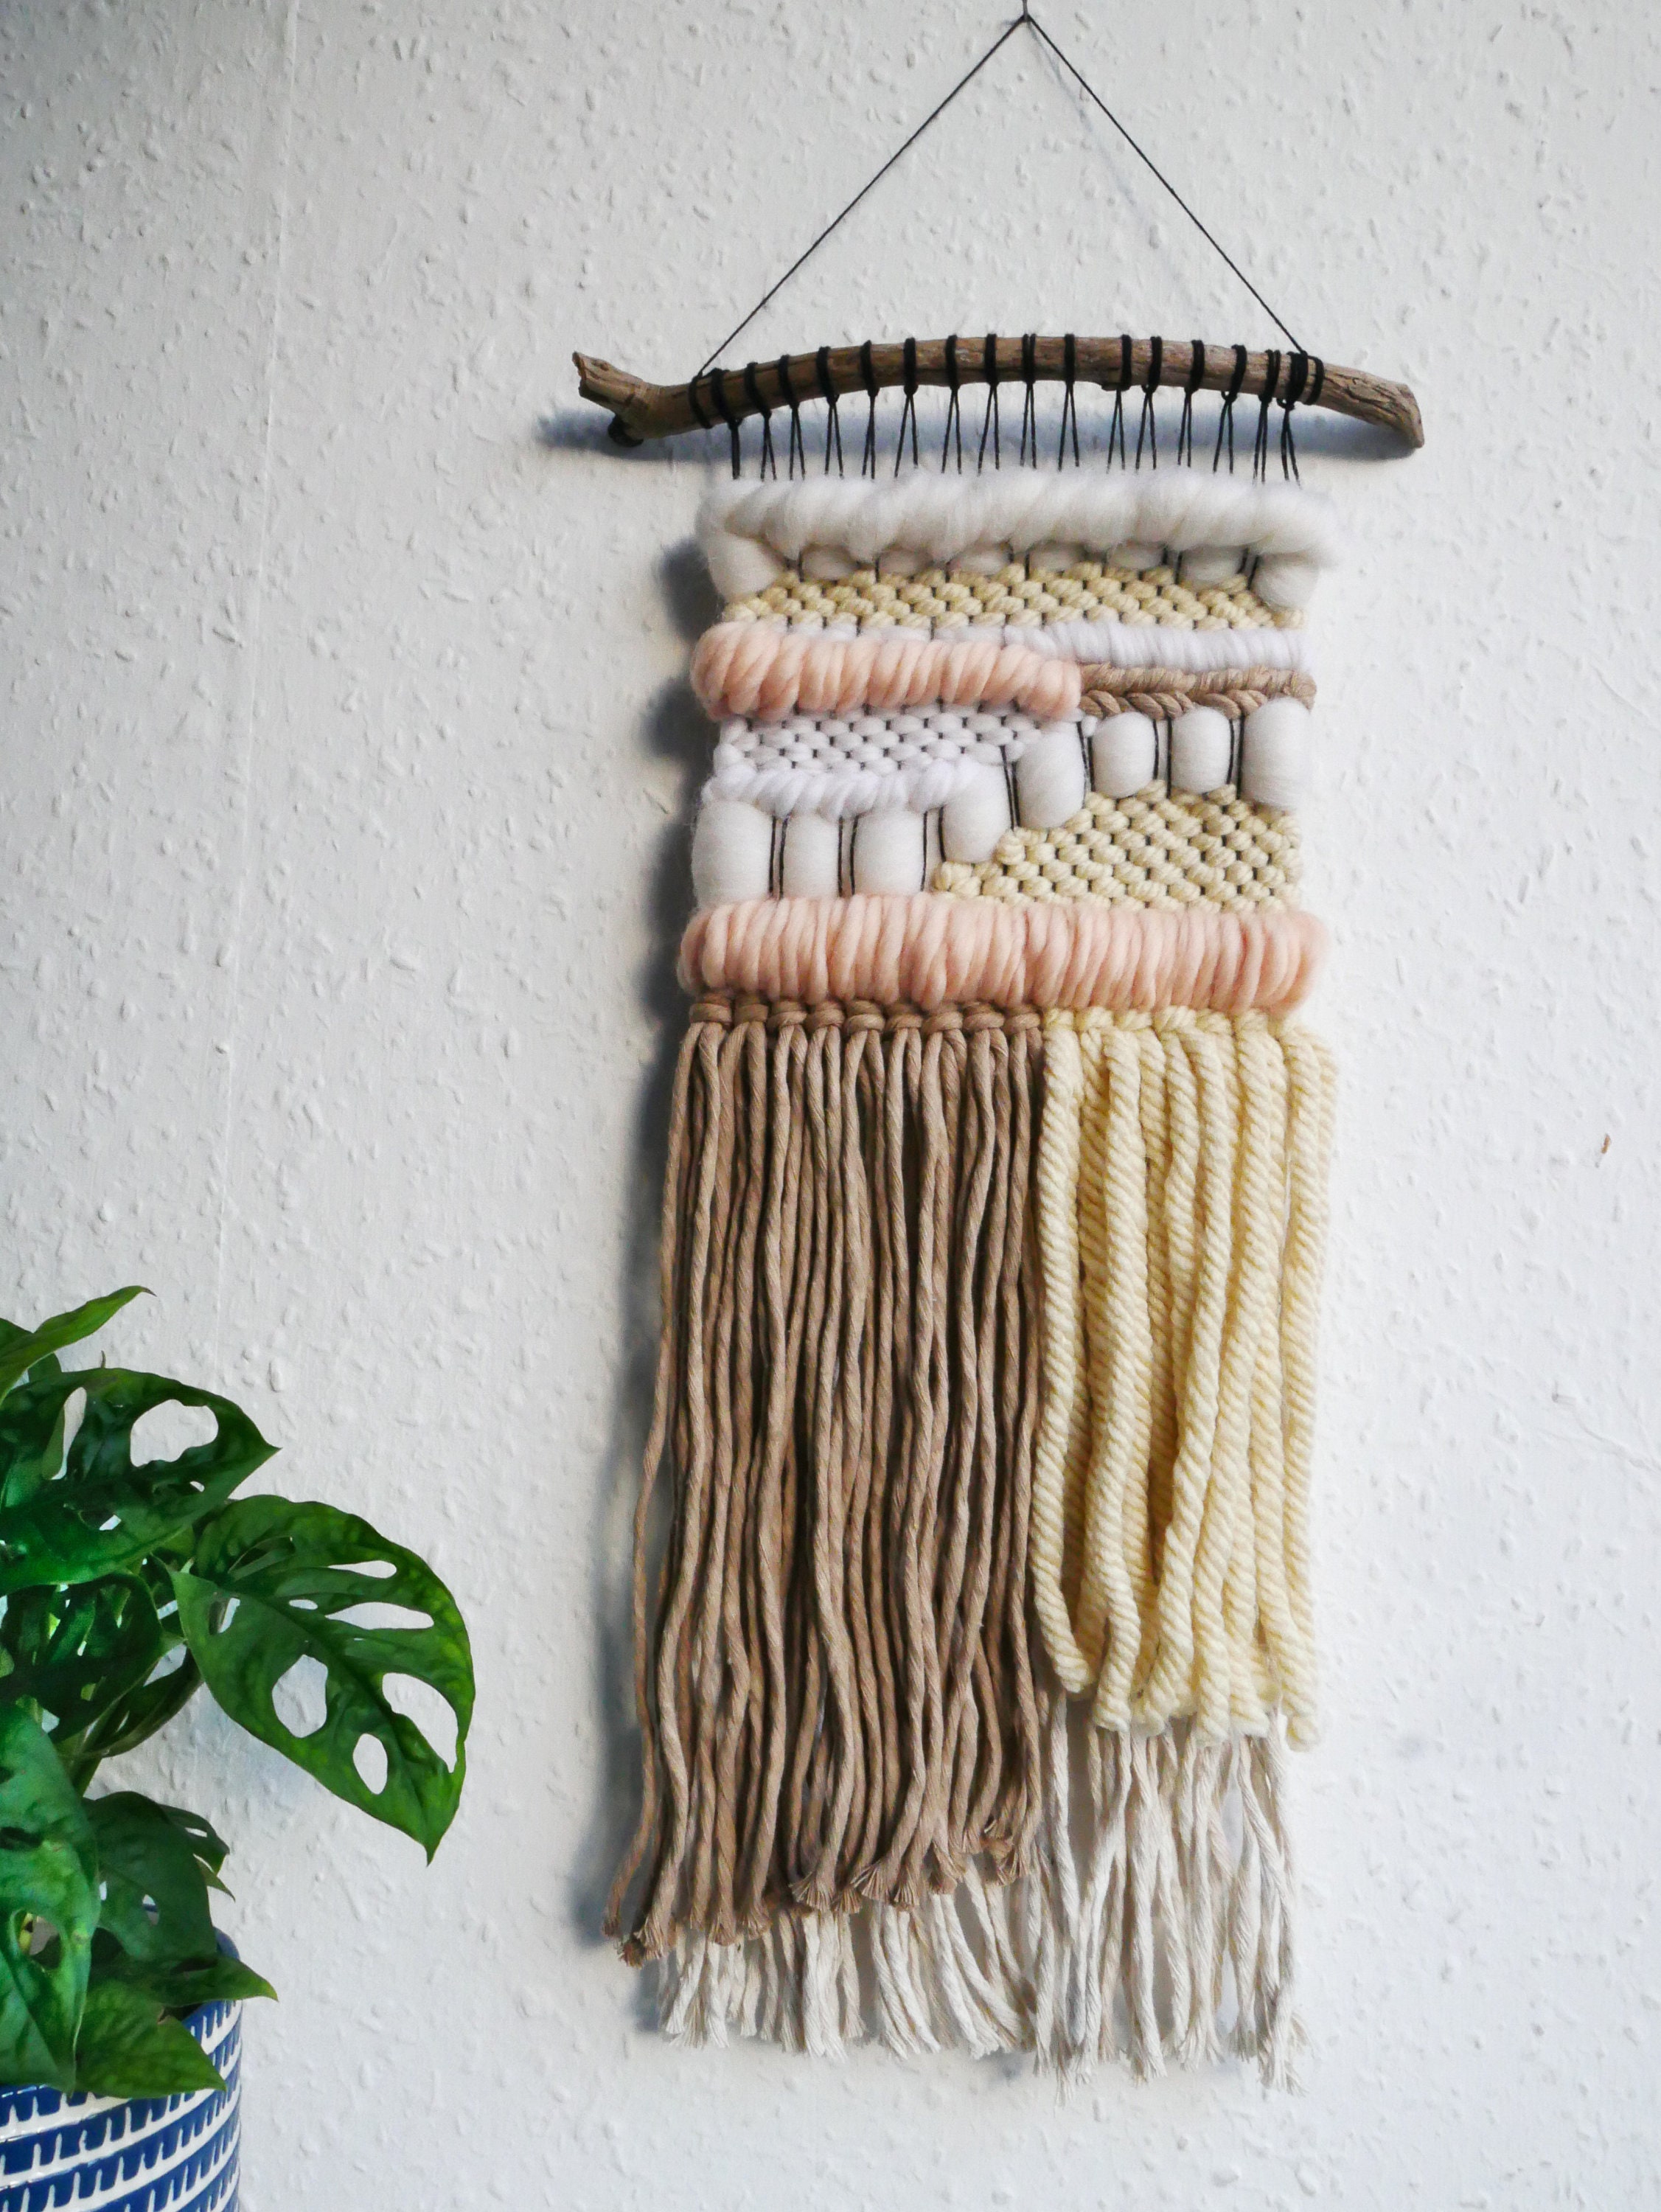 Woven Floral Wall Hanging autumn colours  Weaving loom projects, Handwoven  tapestry, Macrame patterns tutorials